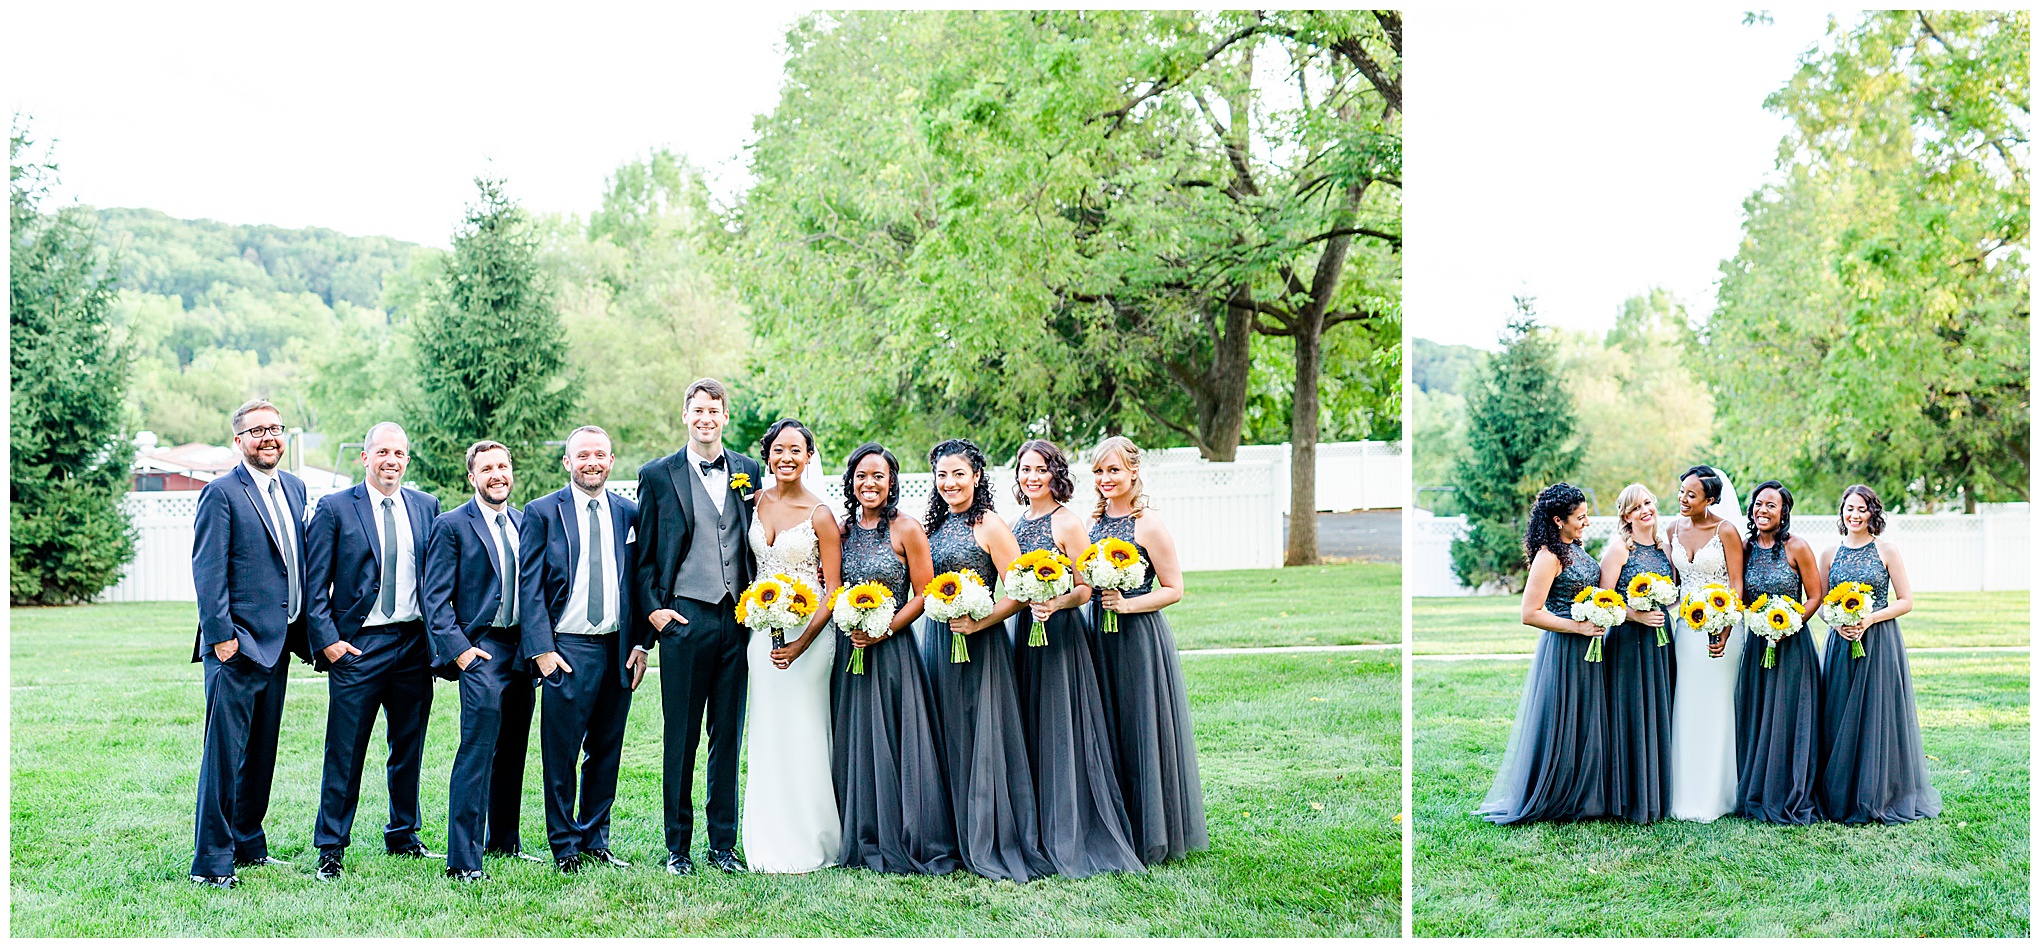 summer mansion at valley country club wedding, Maryland wedding, MD wedding, Maryland wedding photographer, summer wedding, summer wedding inspiration, Baltimore wedding photographer, DC wedding photographer, country club wedding, yellow aesthetic, Rachel E.H. Photography, wedding party portraits